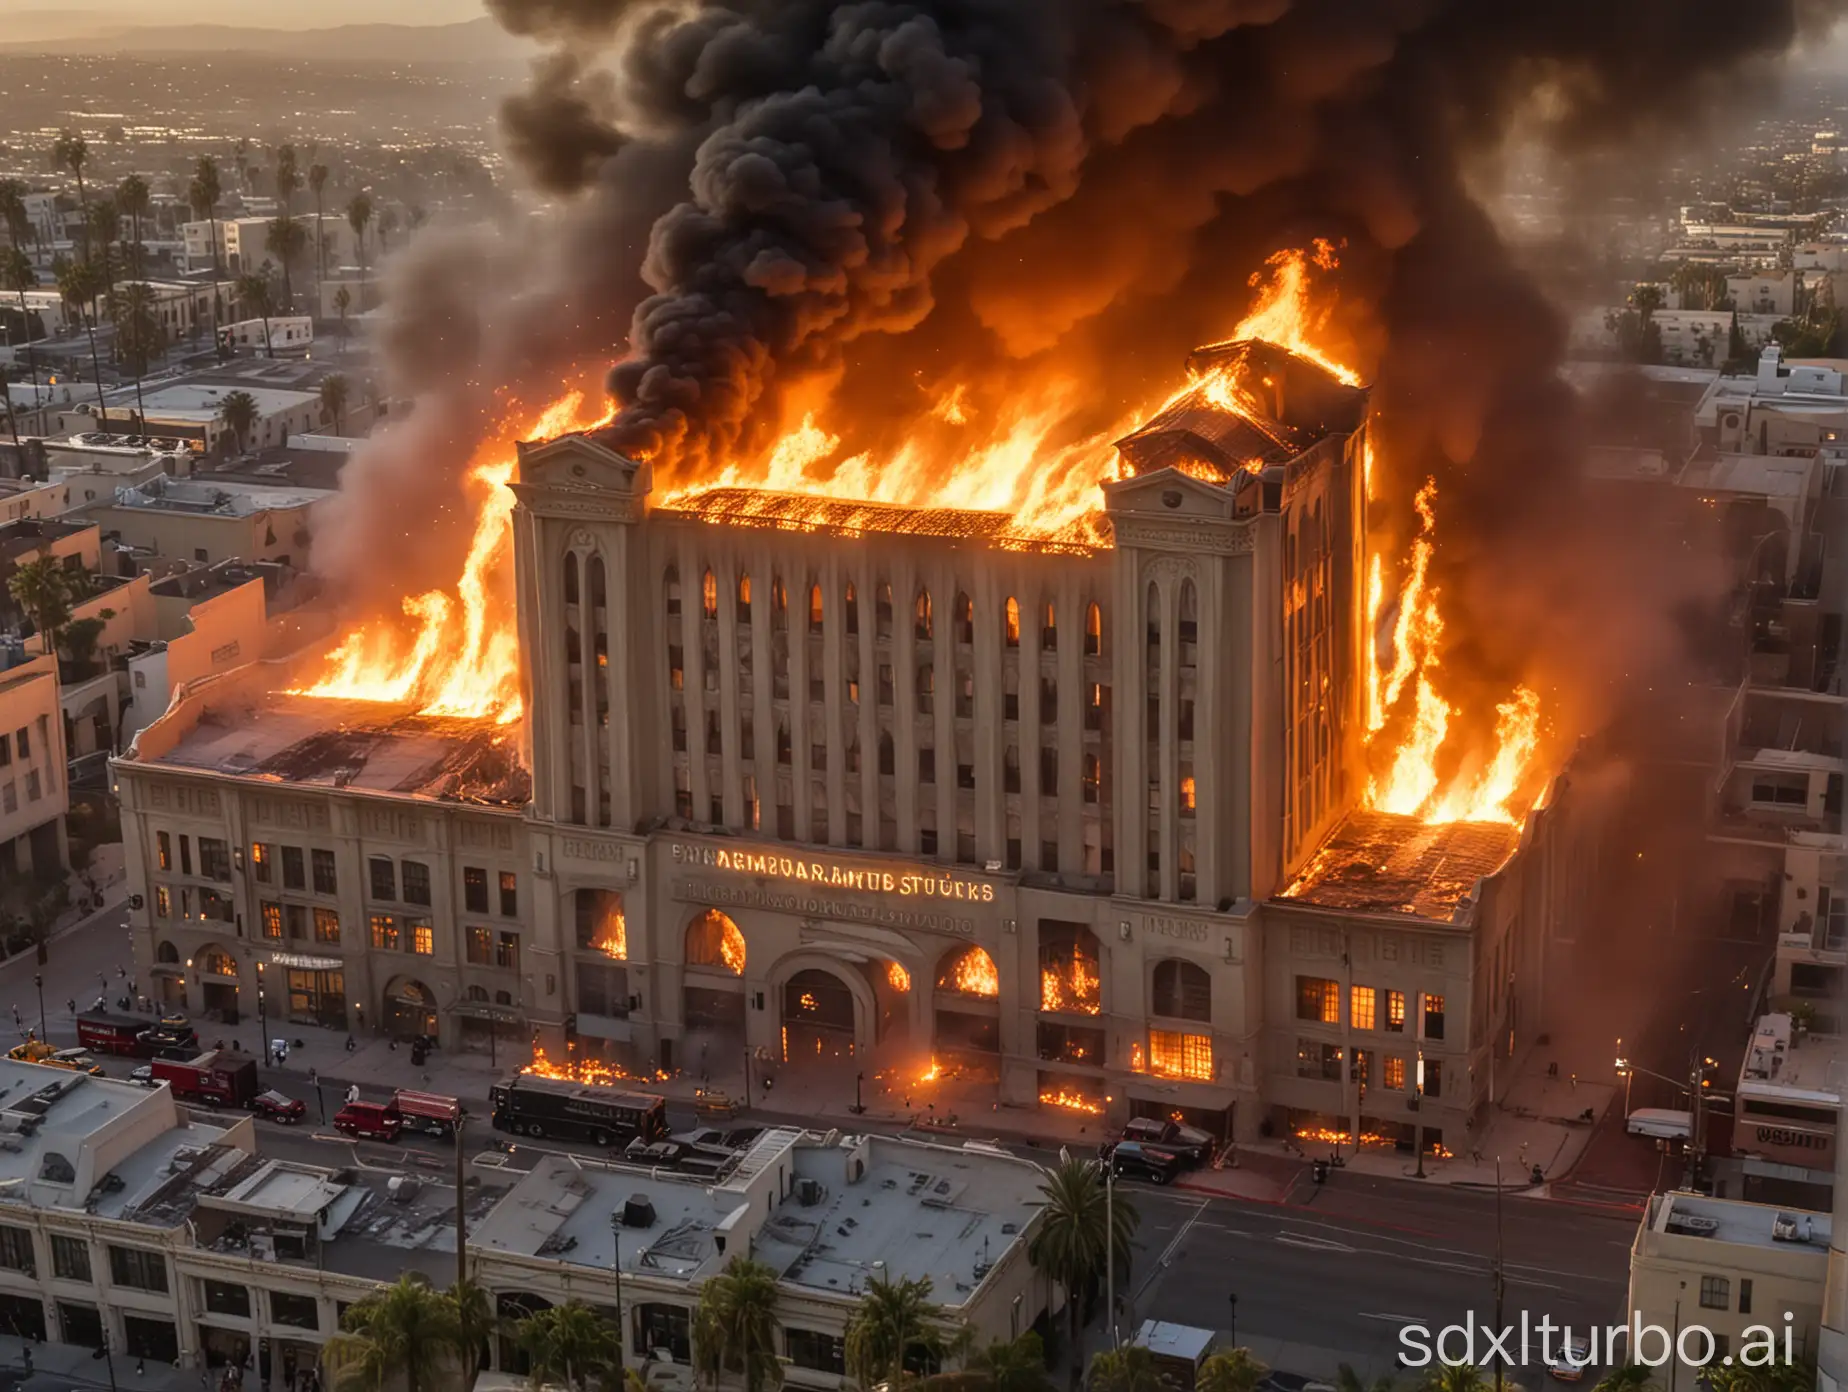 Paramount-Studios-Engulfed-in-Flames-Dramatic-Fire-and-Smoke-Scene